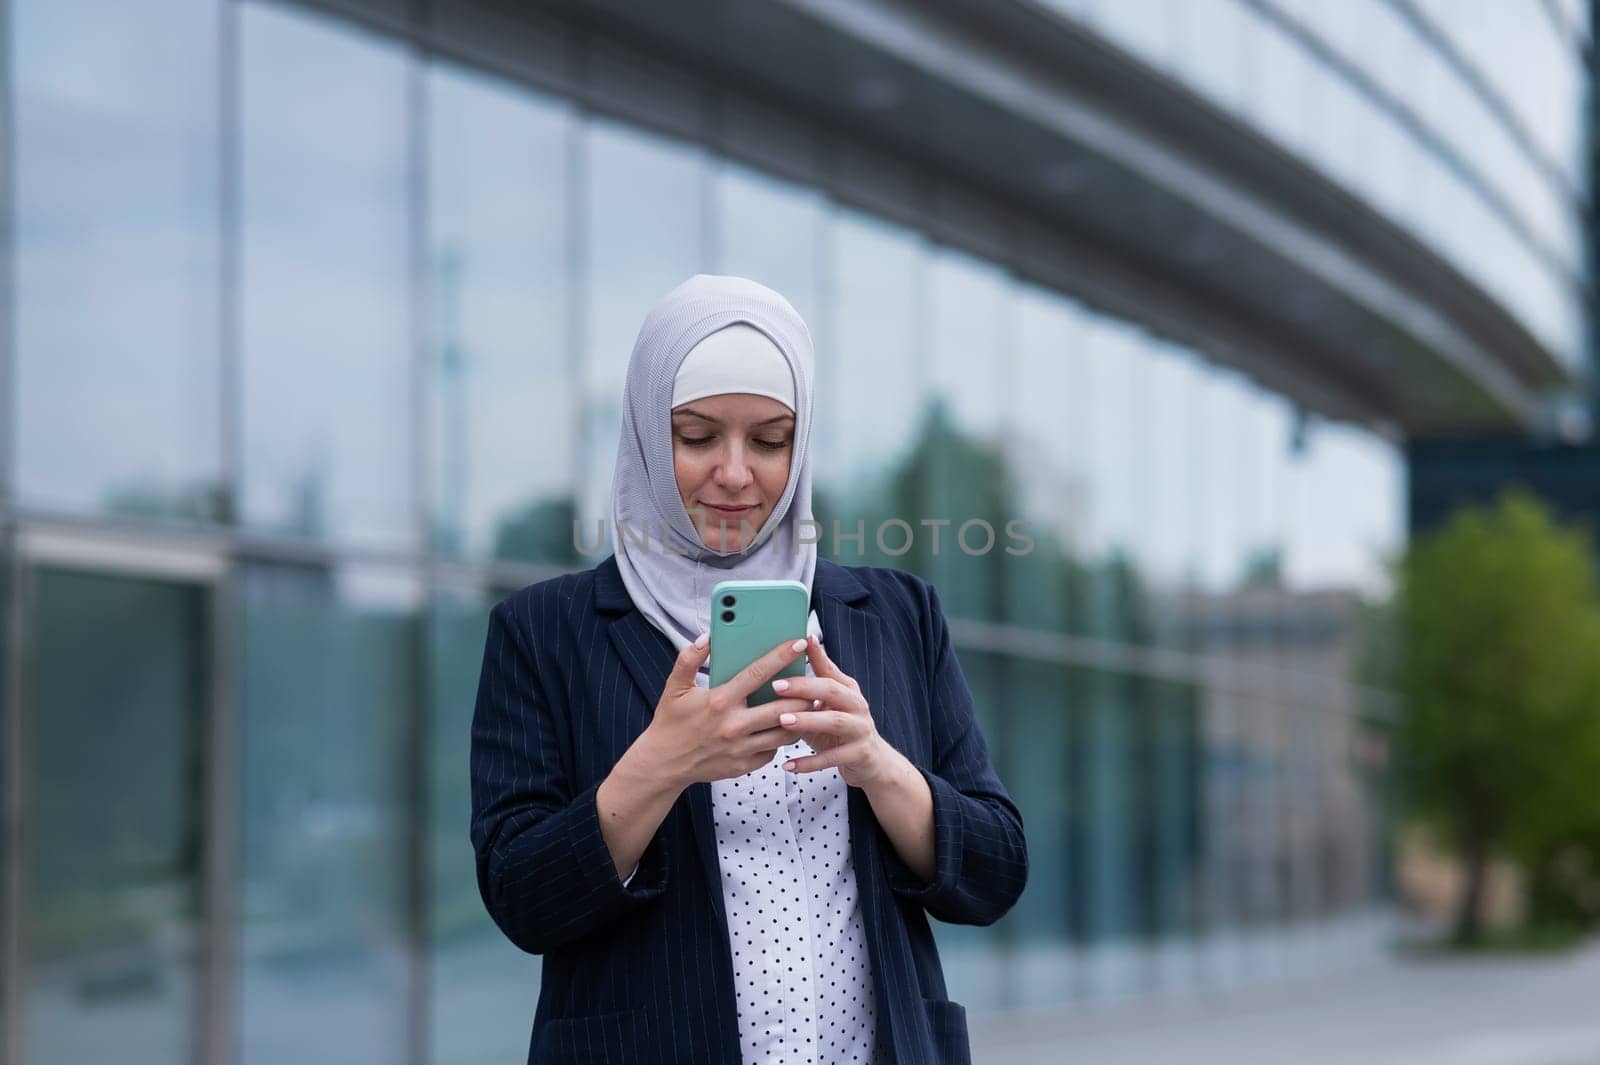 Business woman in hijab and suit using smartphone outdoors. by mrwed54